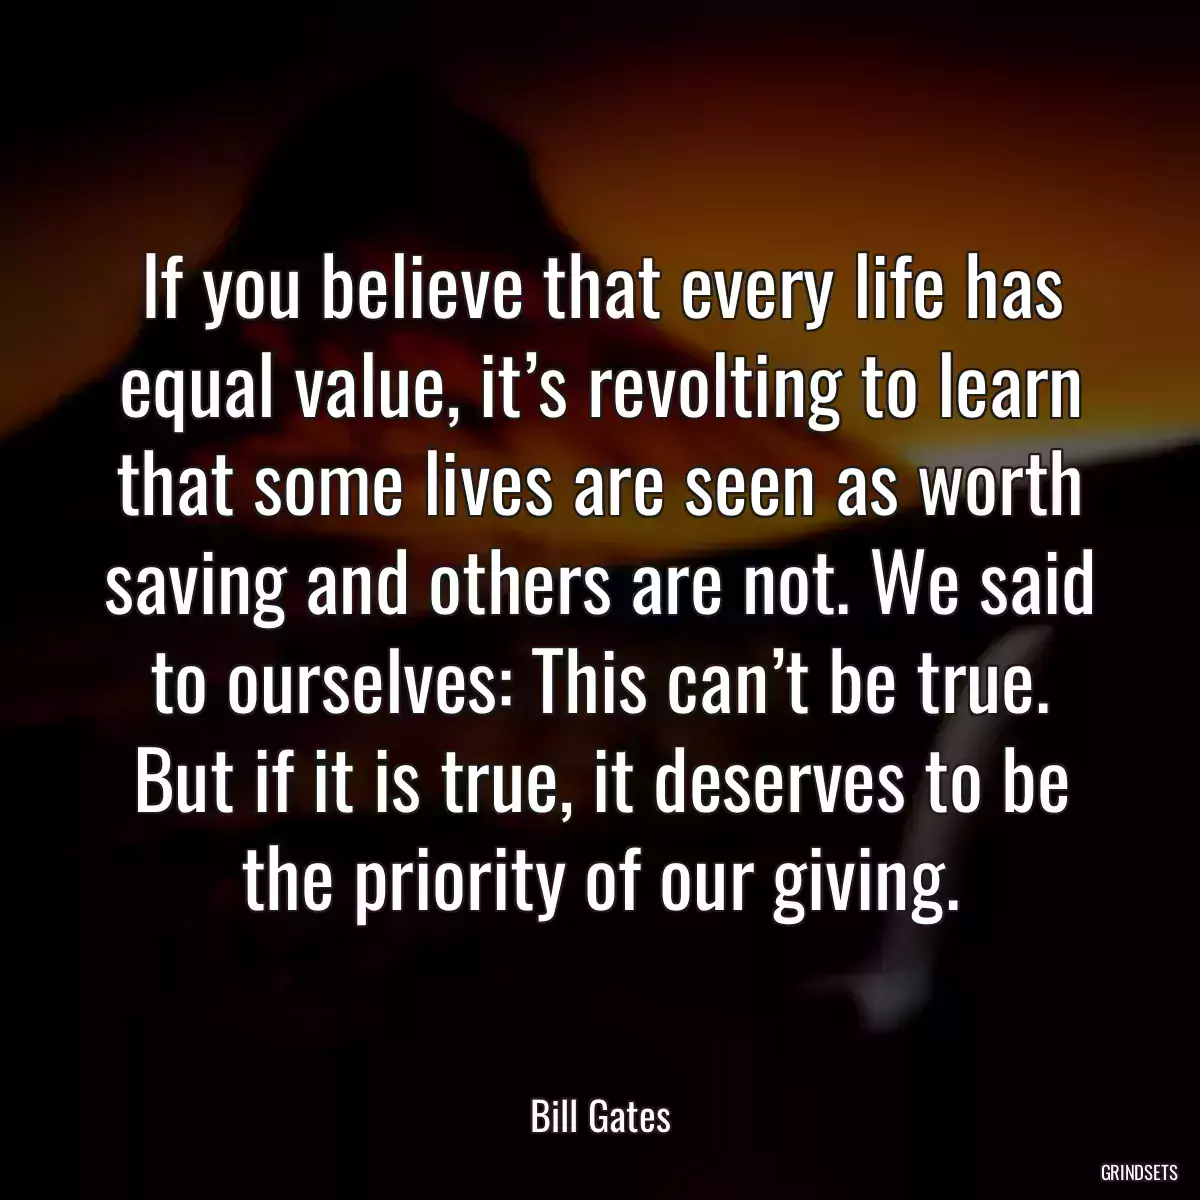 If you believe that every life has equal value, it’s revolting to learn that some lives are seen as worth saving and others are not. We said to ourselves: This can’t be true. But if it is true, it deserves to be the priority of our giving.